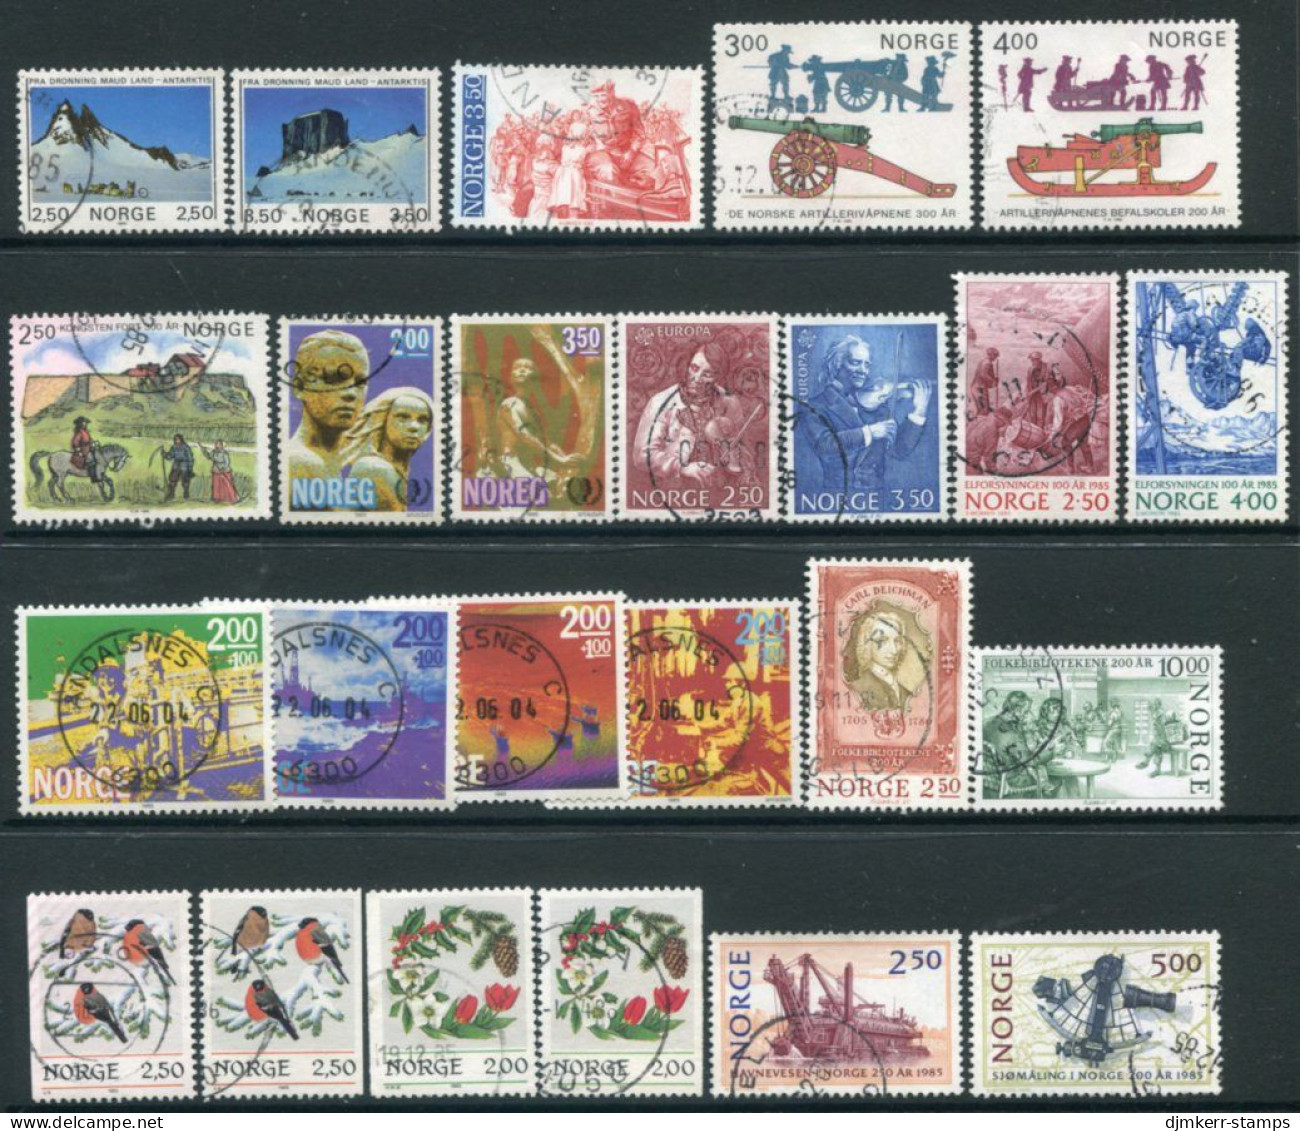 NORWAY 1985 Complete Year Issues Used  Michel 918-939, Block 5 As Single Stamps - Used Stamps